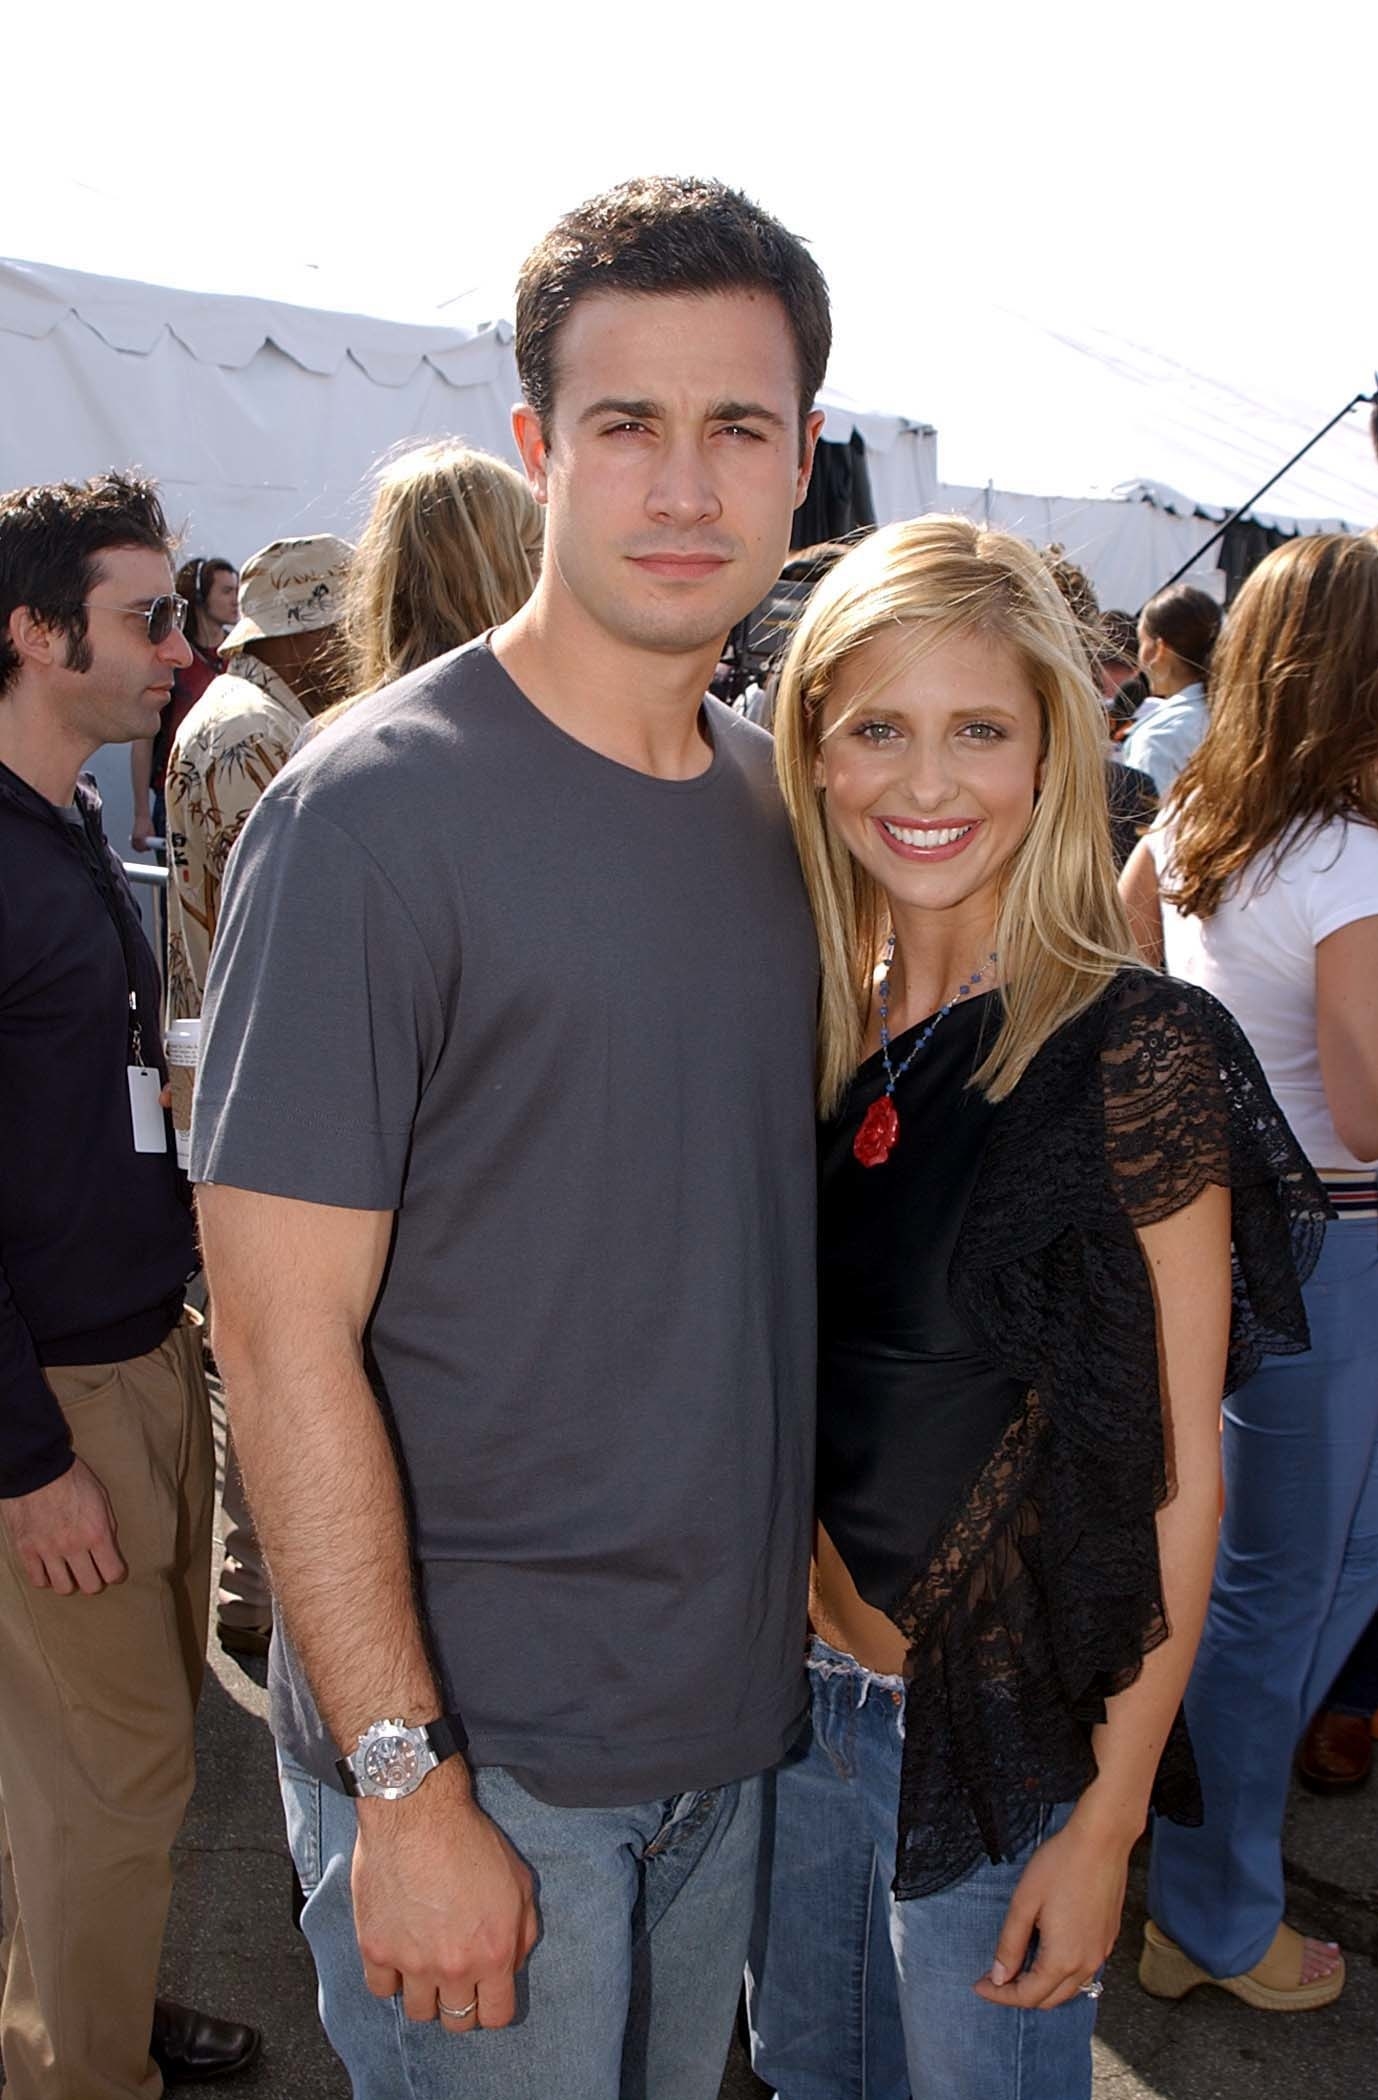 A photo of a young Freddie Prinze Jr and Sarah Michelle Gellar